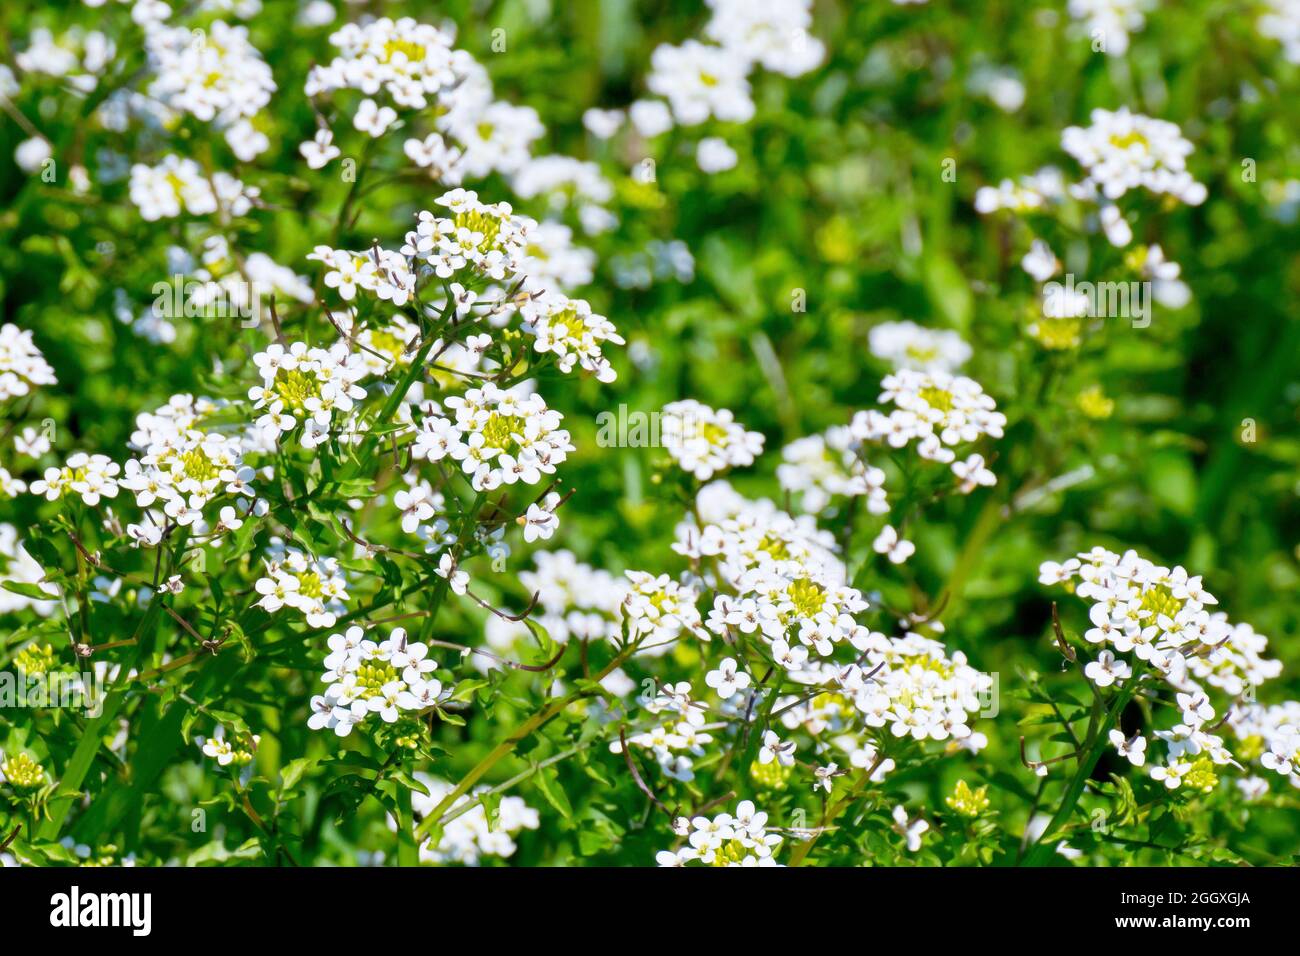 Water-cress (nasturtium officinale), close up showing a mass of the white flowered plant growing at the bottom of a roadside ditch. Stock Photo